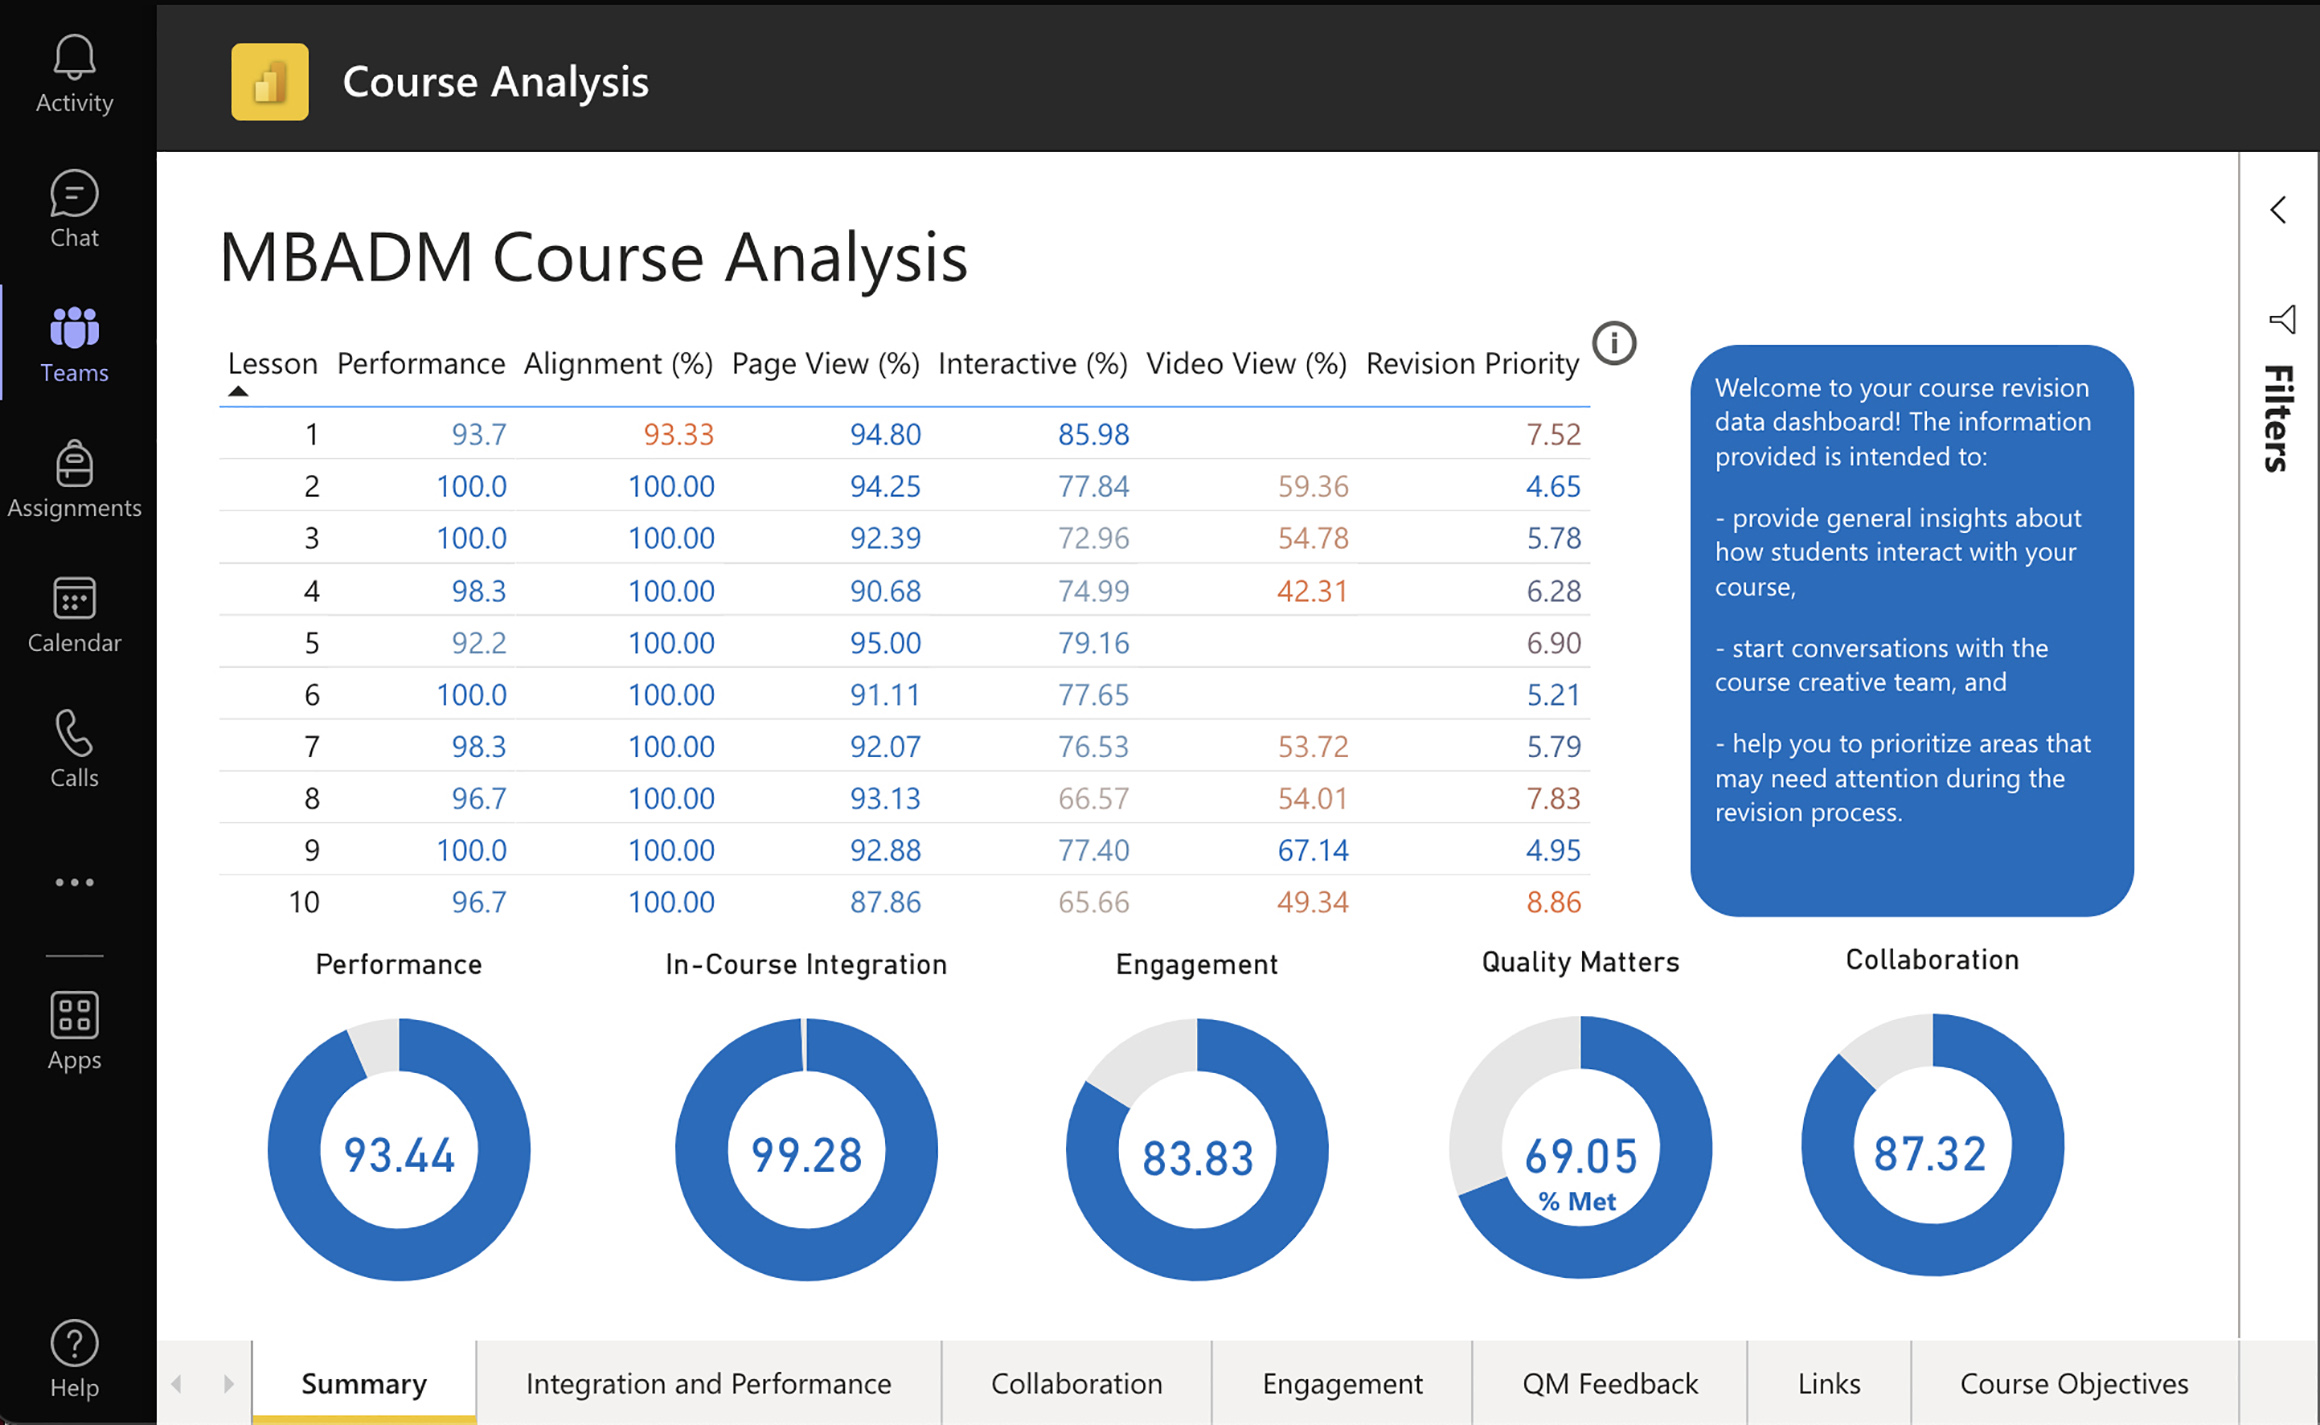 A screenshot from the MBA team's learning analytics dashboard shows an analysis of the data that's been collected.